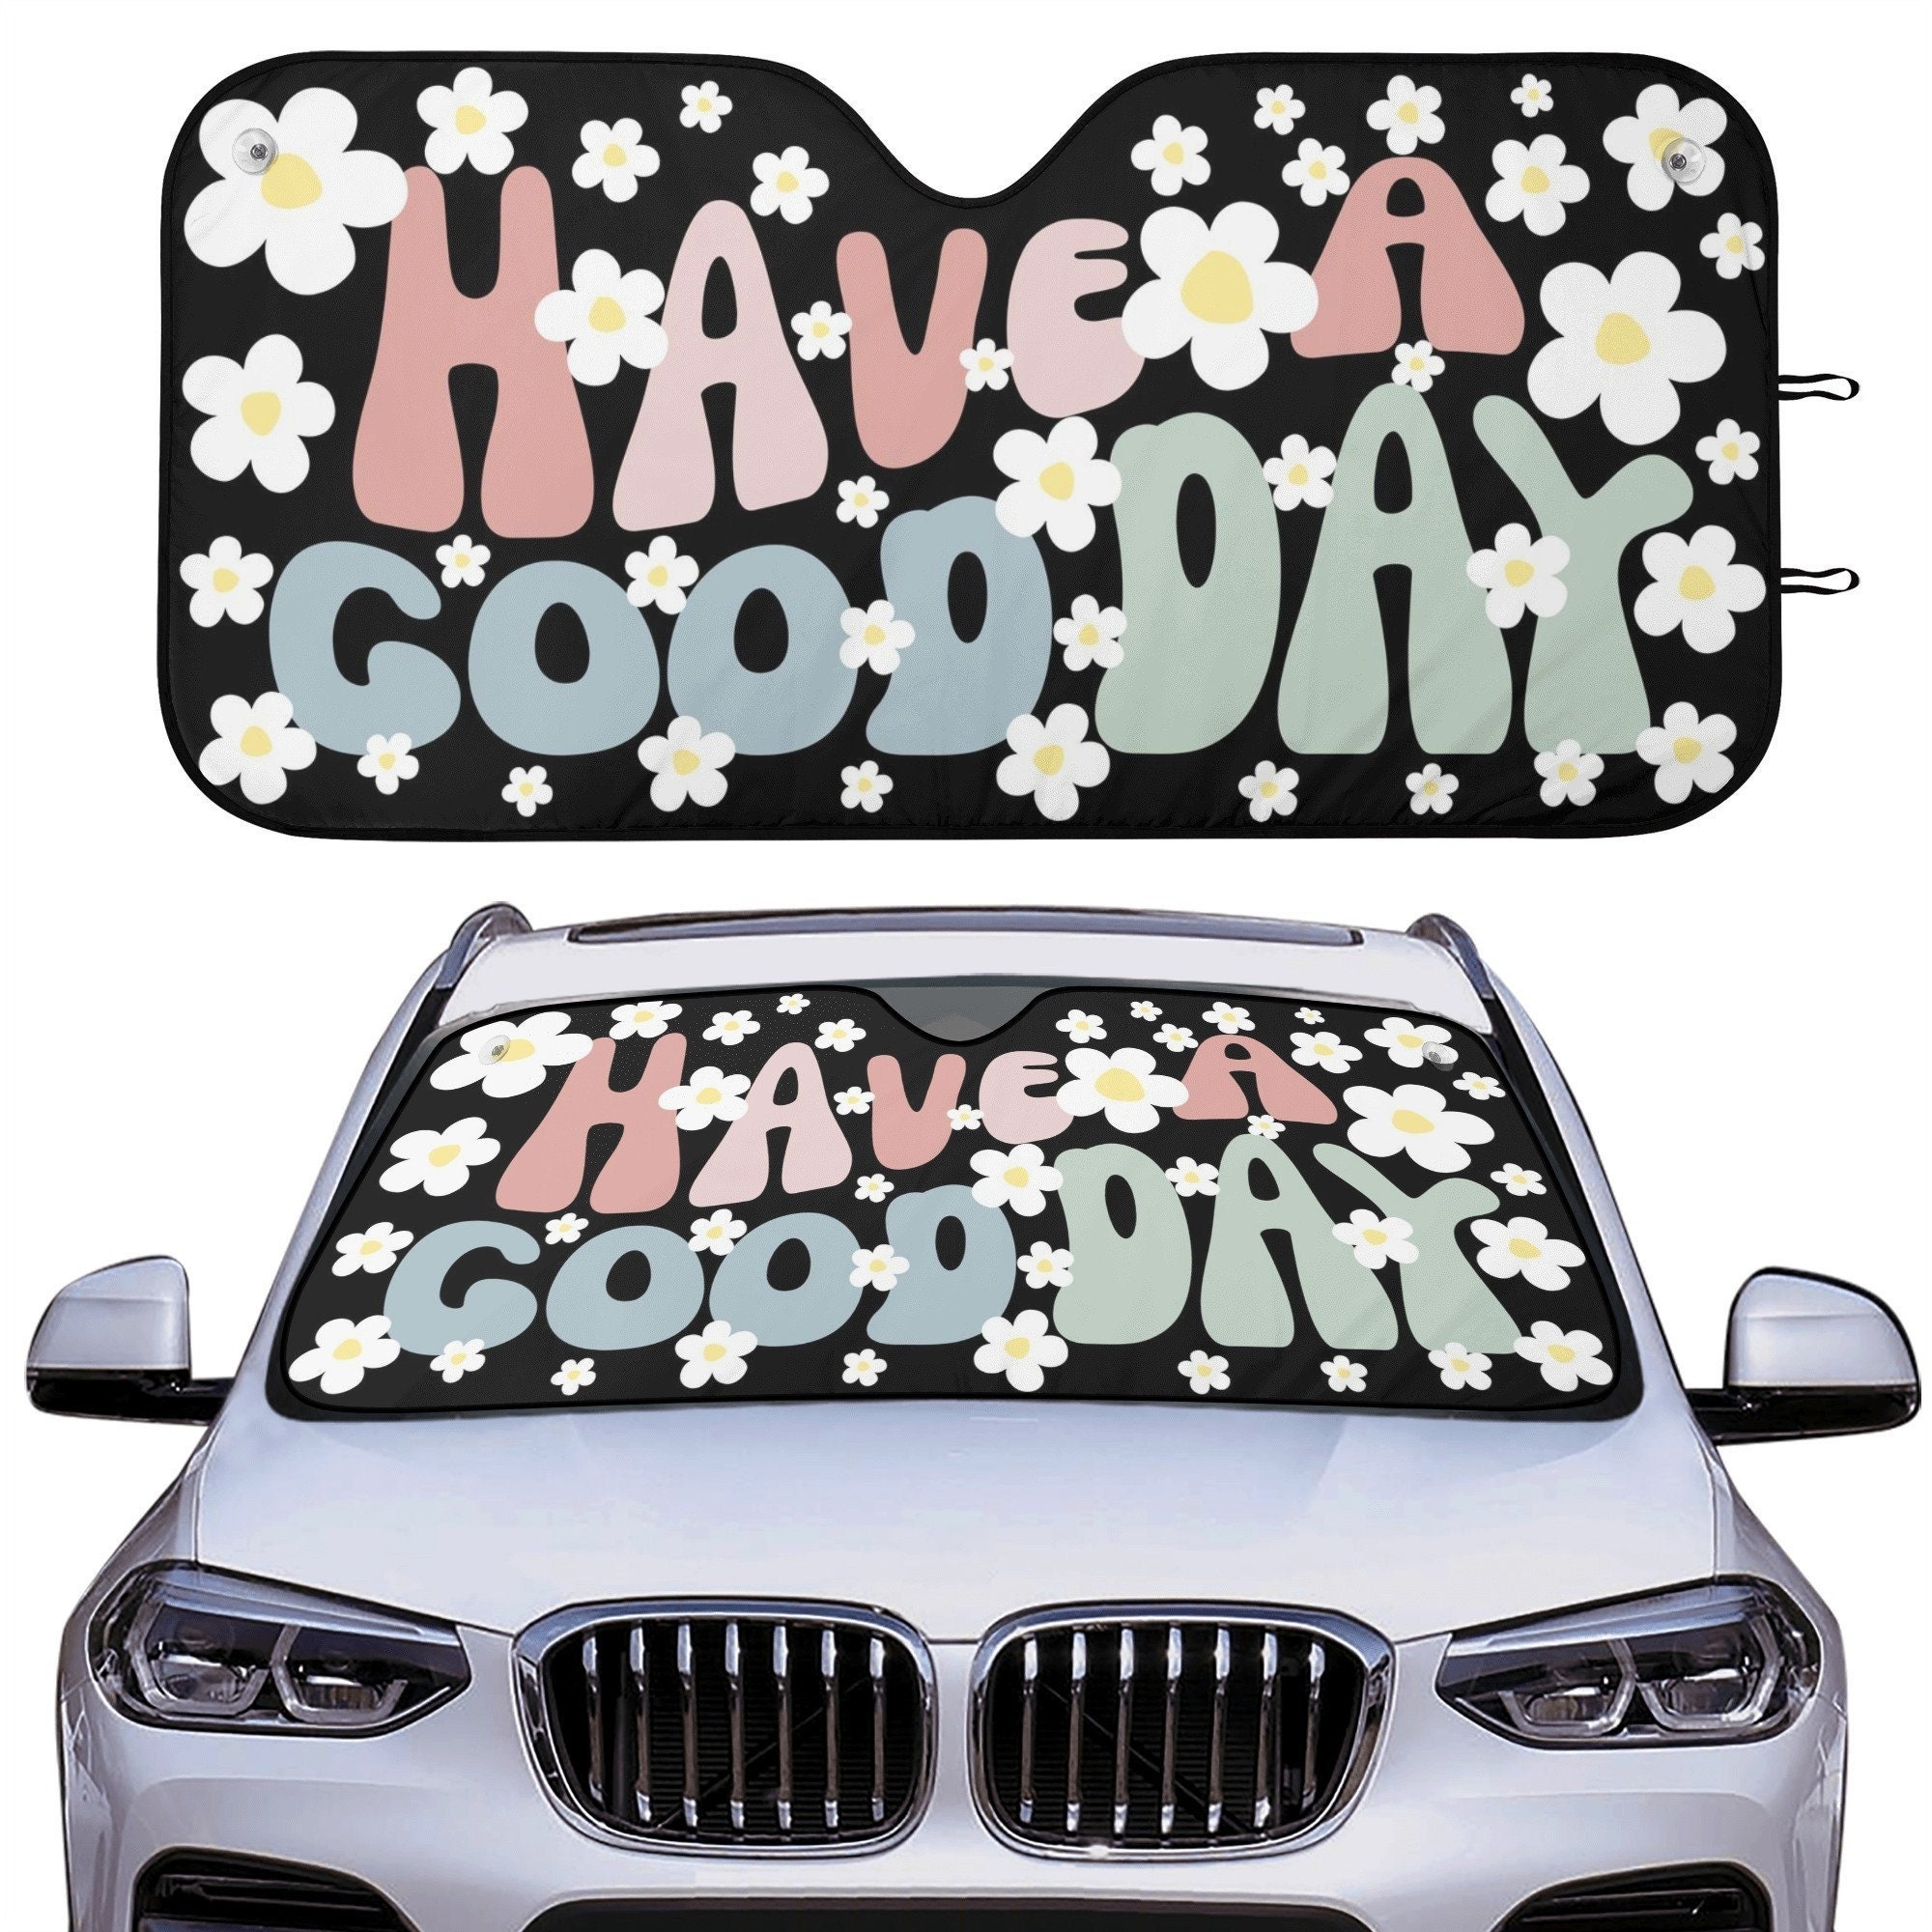 Starry Night Galaxy Midnight Rainbow Privacy Sunshade for Windshield Boho Womens  Car Accessories Matching Car Accessories 